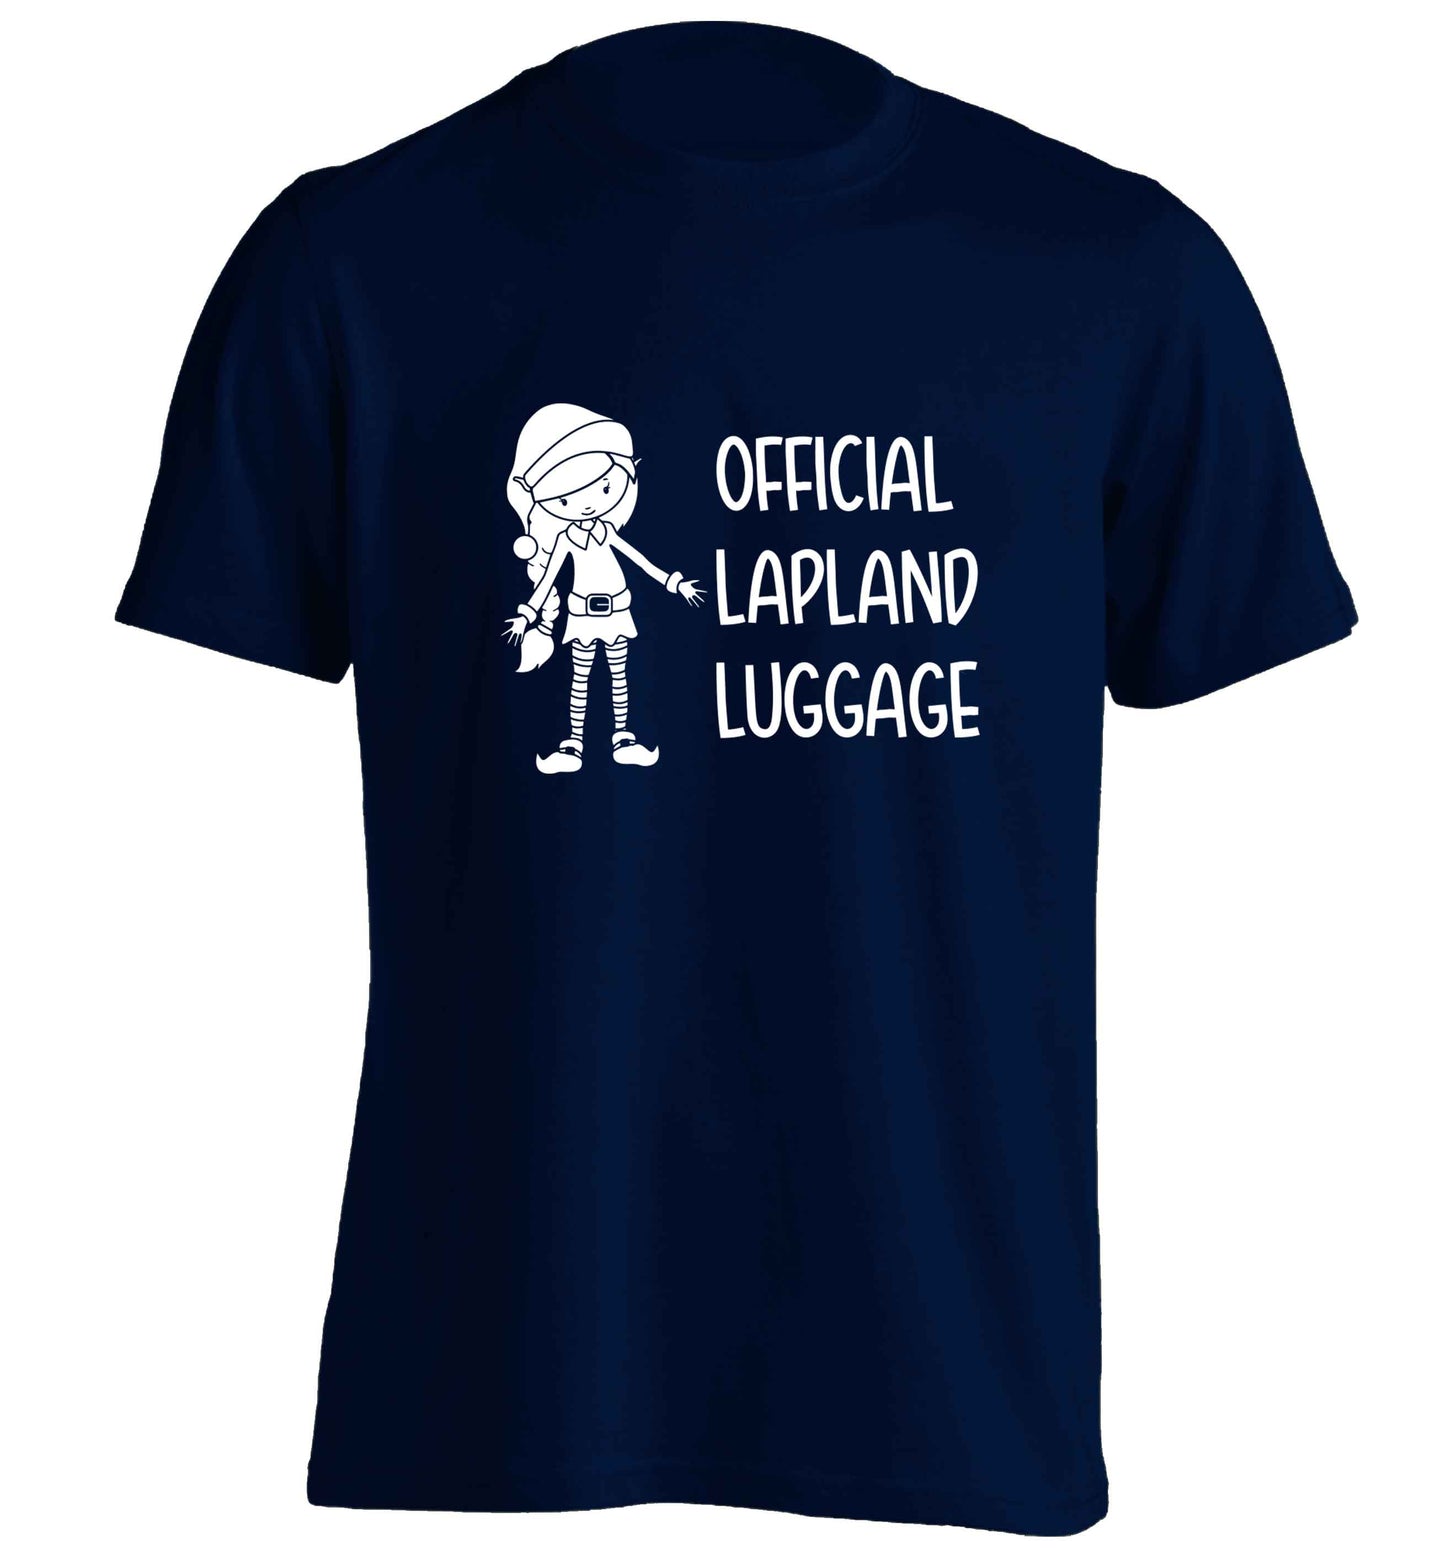 Official lapland luggage - Elf snowflake adults unisex navy Tshirt 2XL